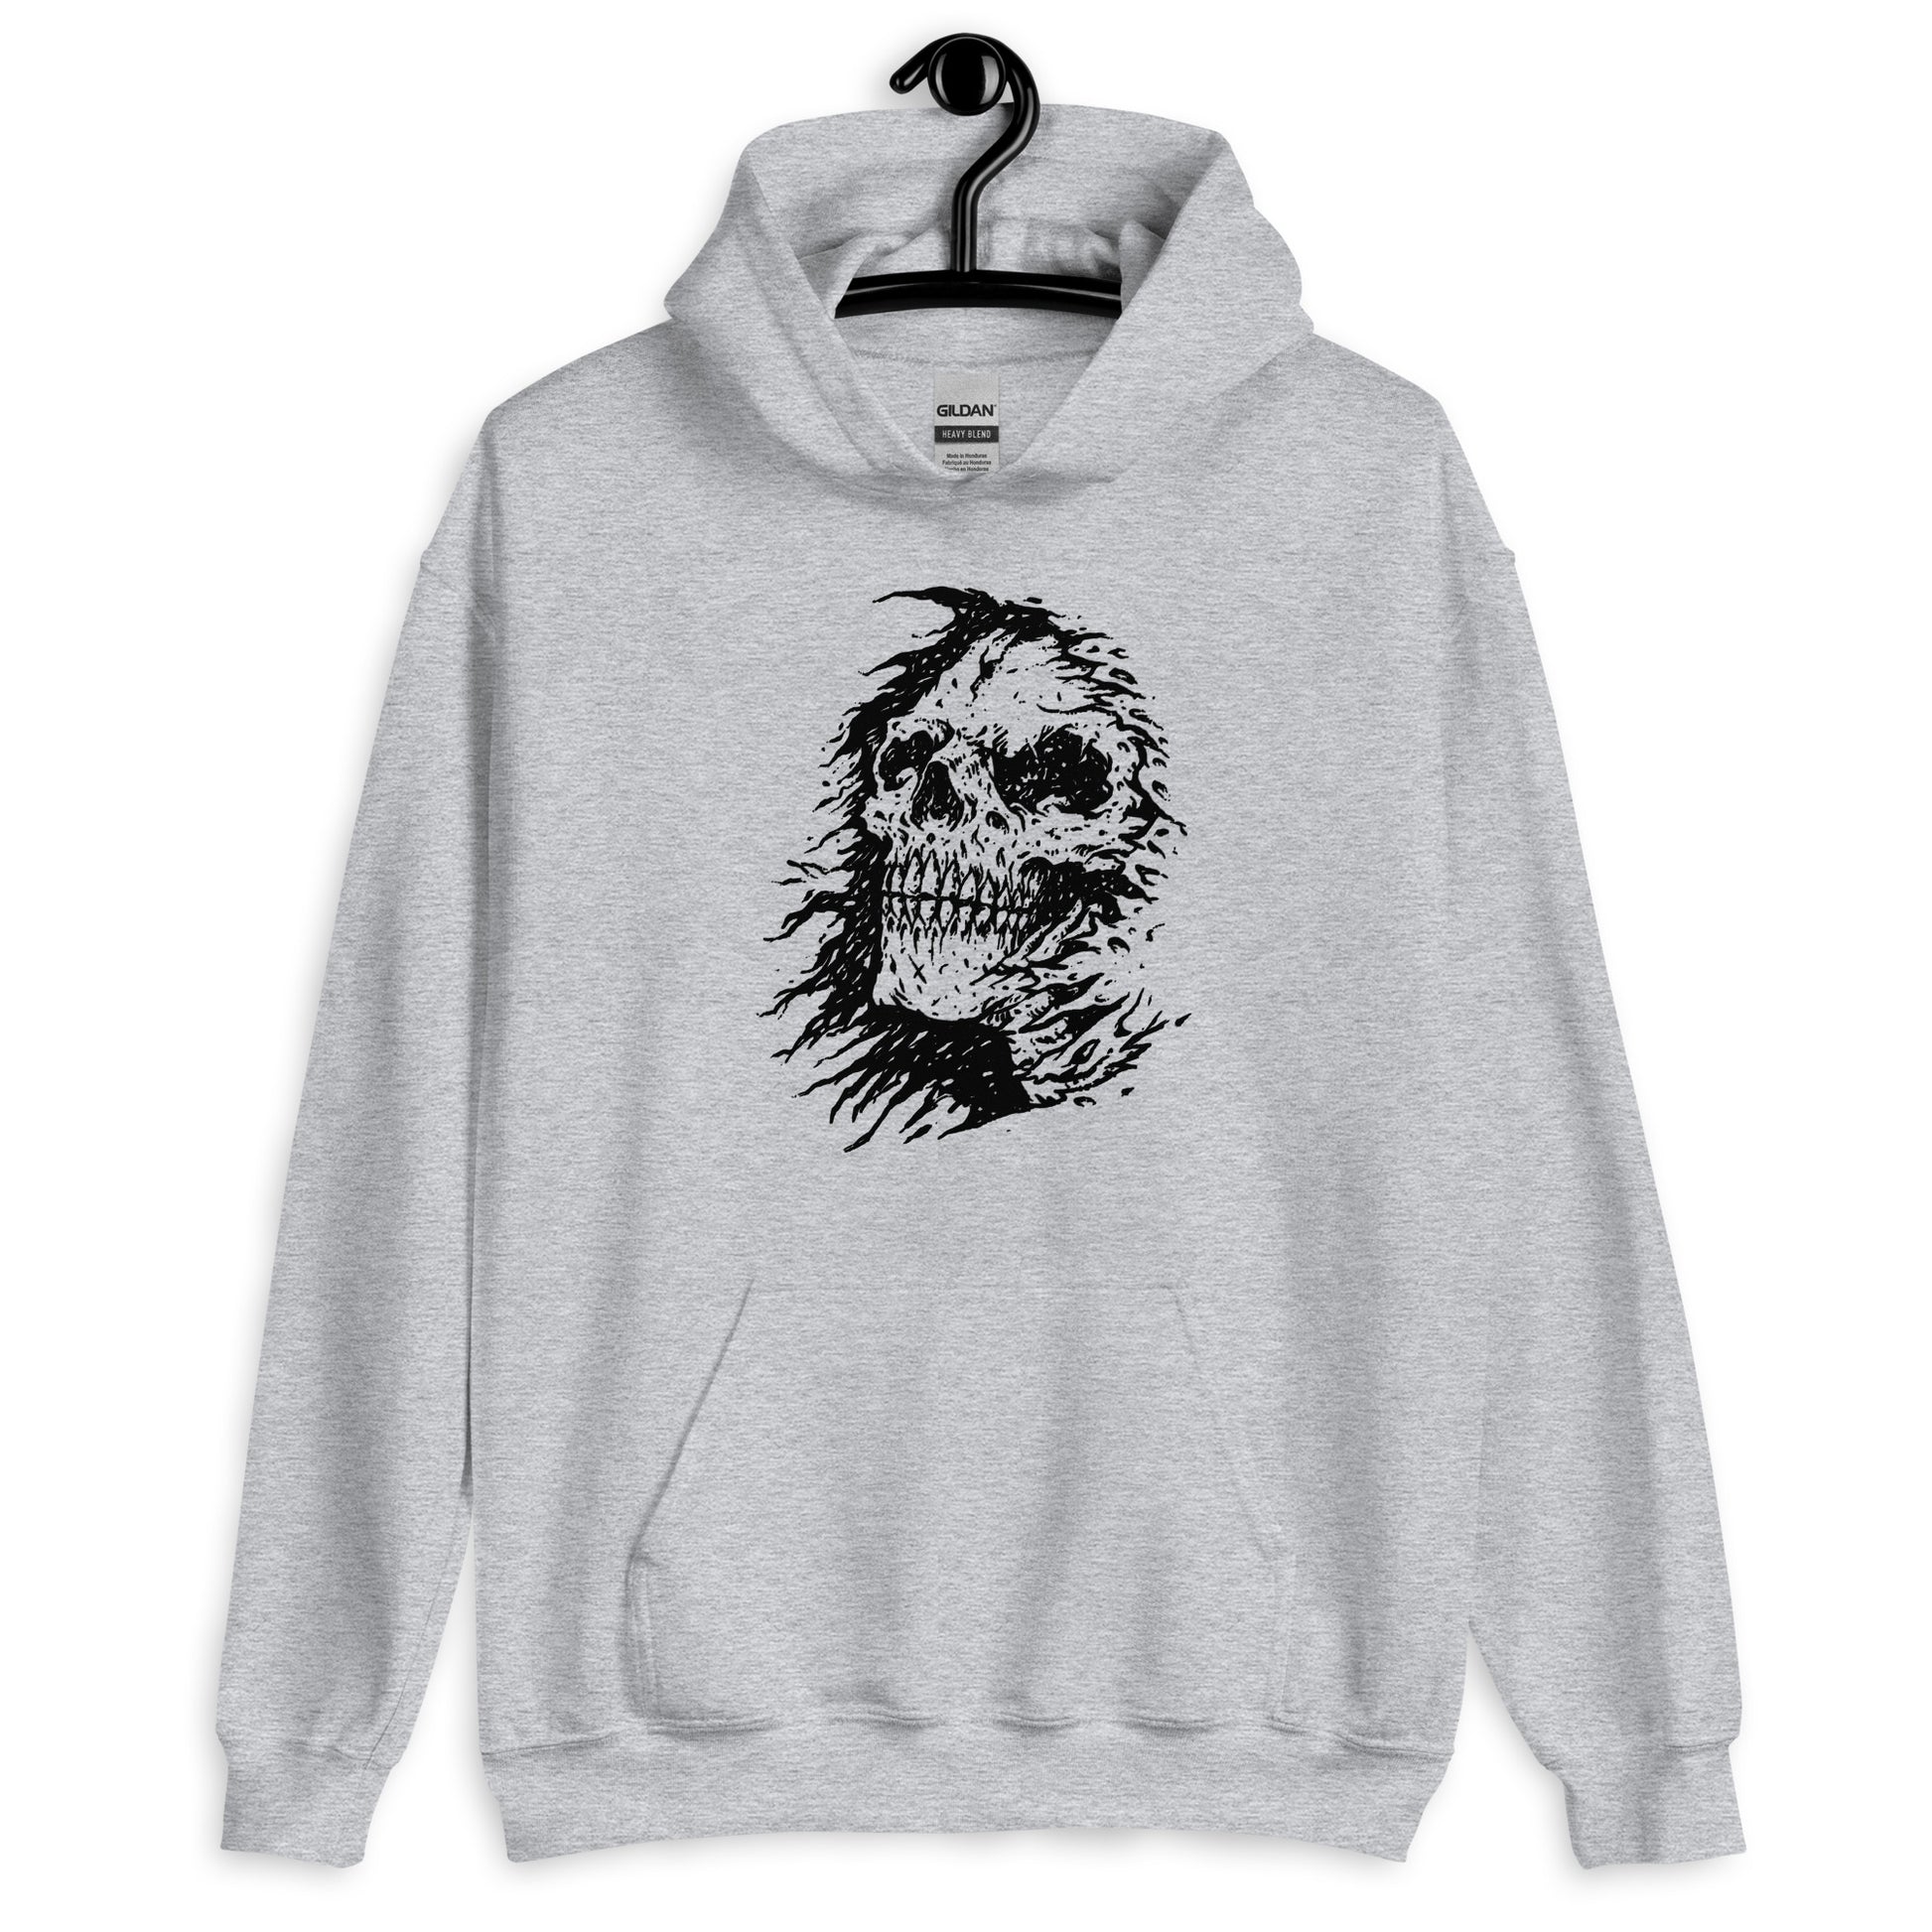 The Grim Reapers Skull Face Hoodie gray